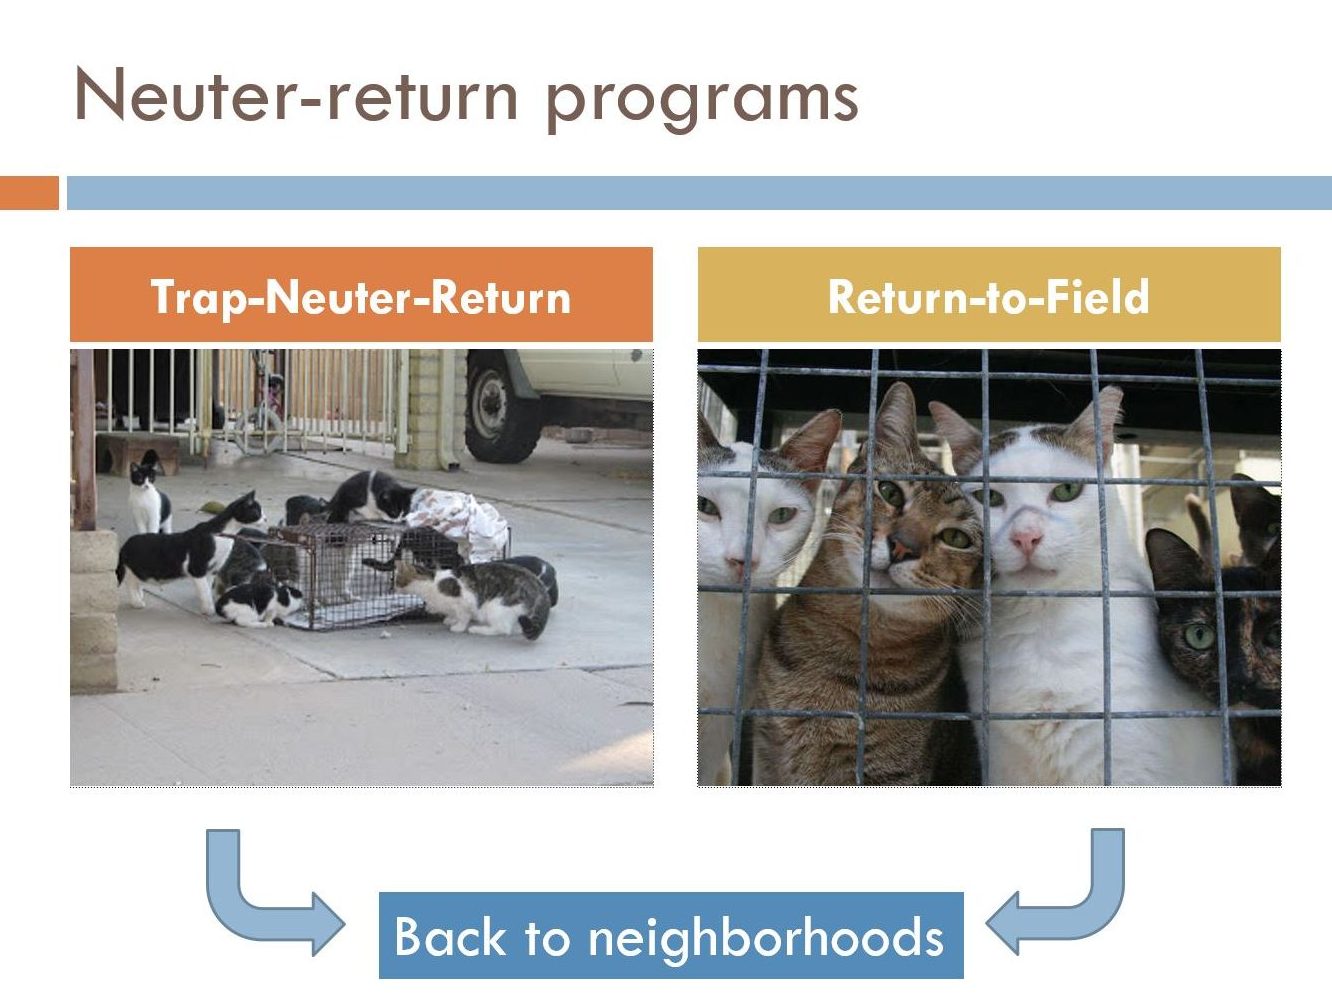 Infographic showing Trap-Neuter-Return and Return-to-Field process